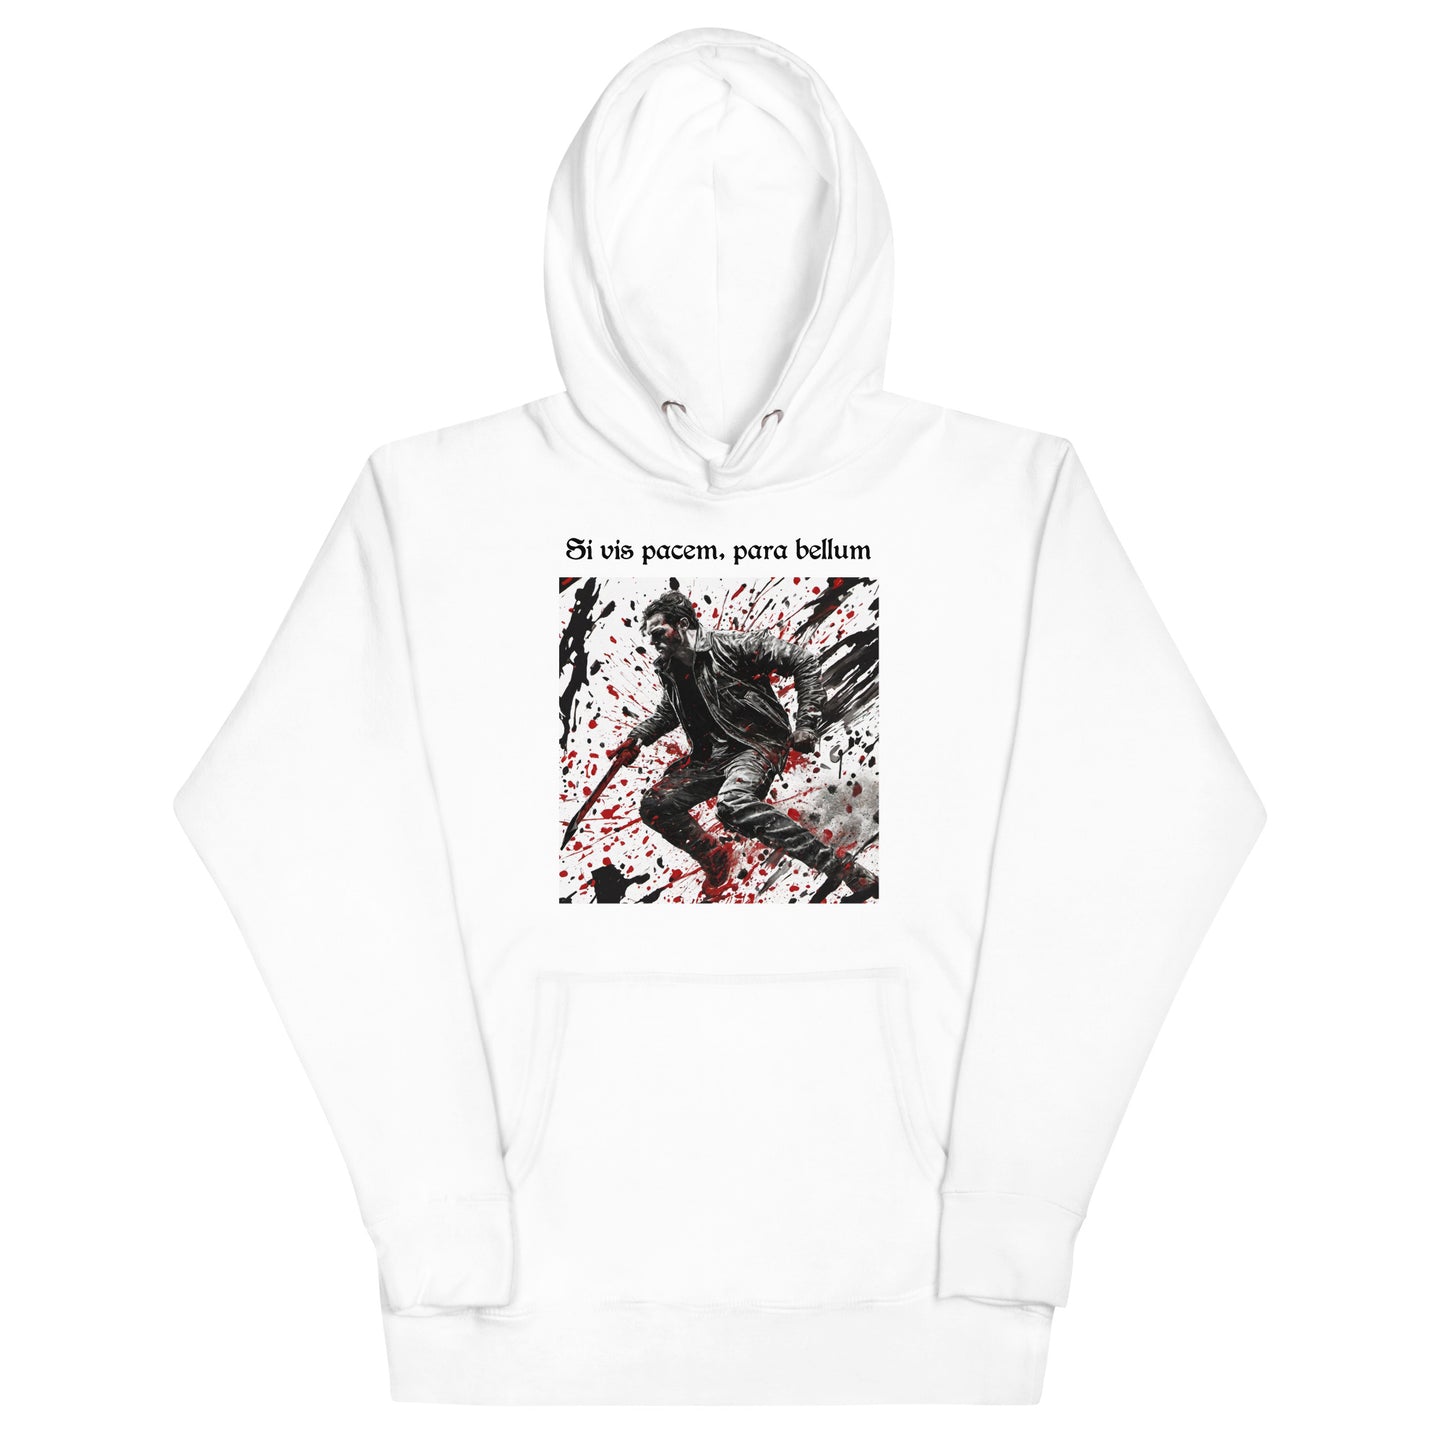 If You Want Peace, Prepare for War Men's Hoodie White